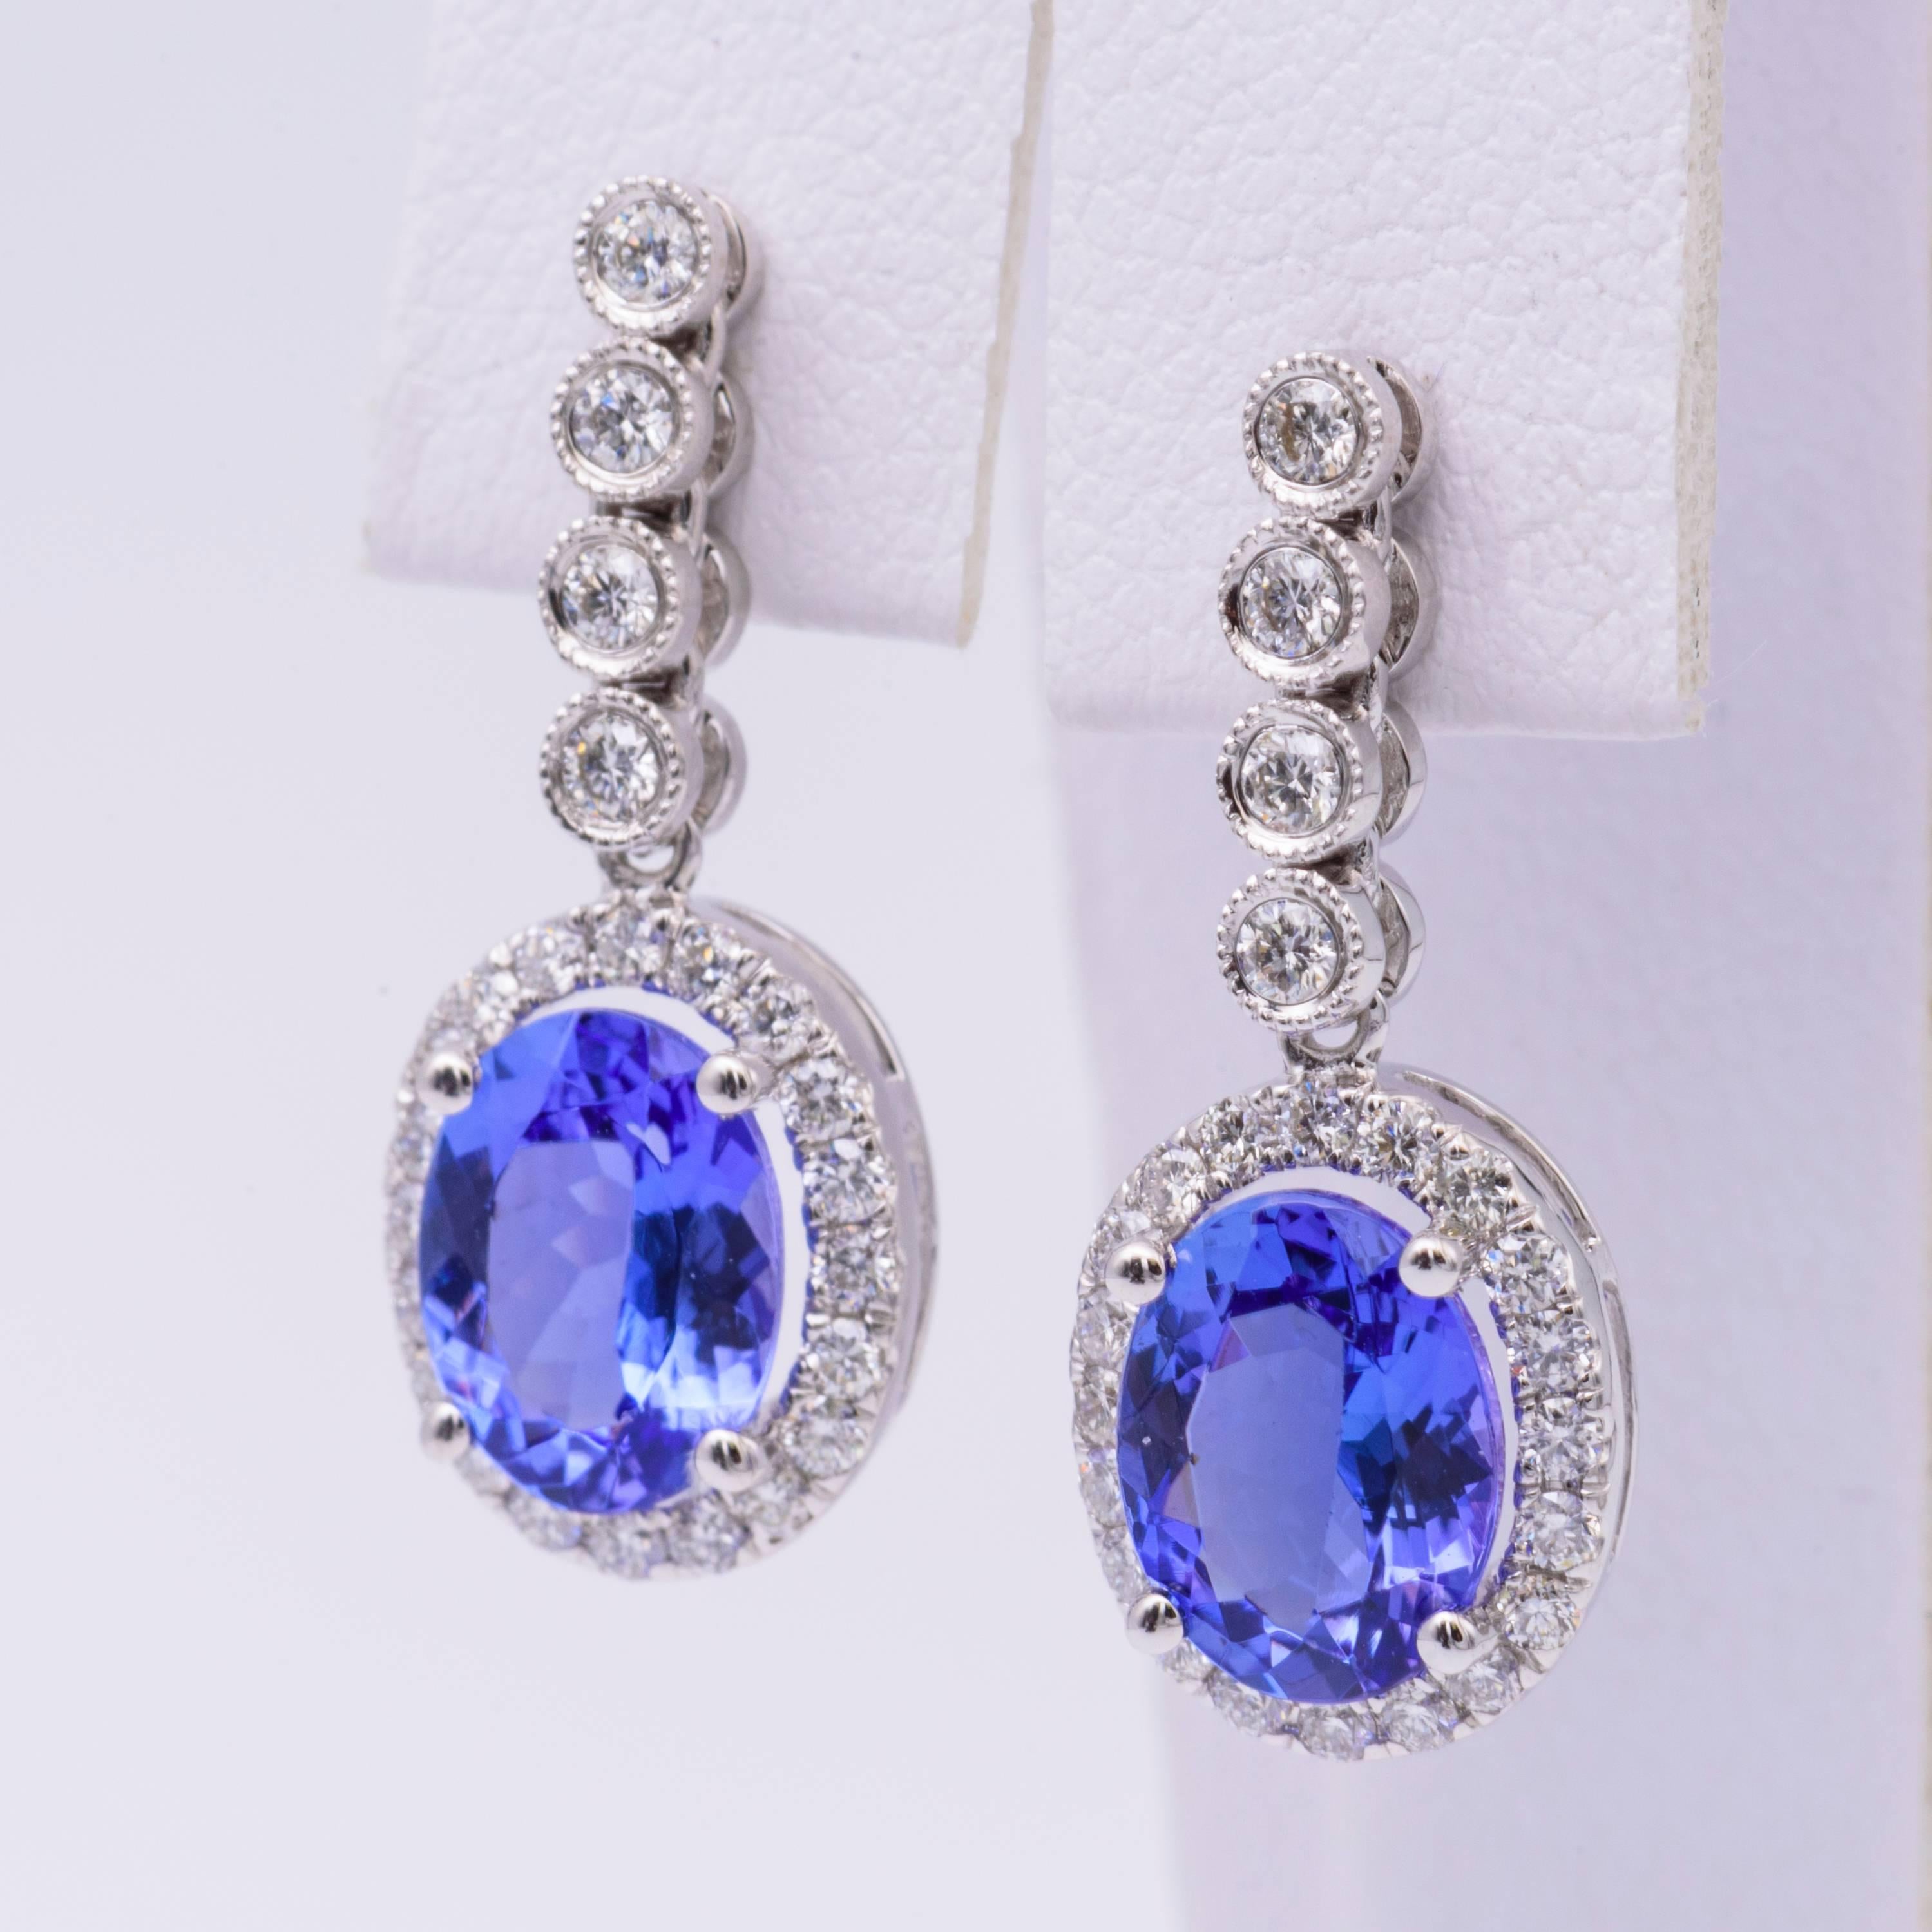 14k White gold earrings
Oval Tanzanite 8 X 6 mm 2.60 Carats
Diamonds 0.50 Cts. total weight
The Earrings measures 22 X 8 mm 